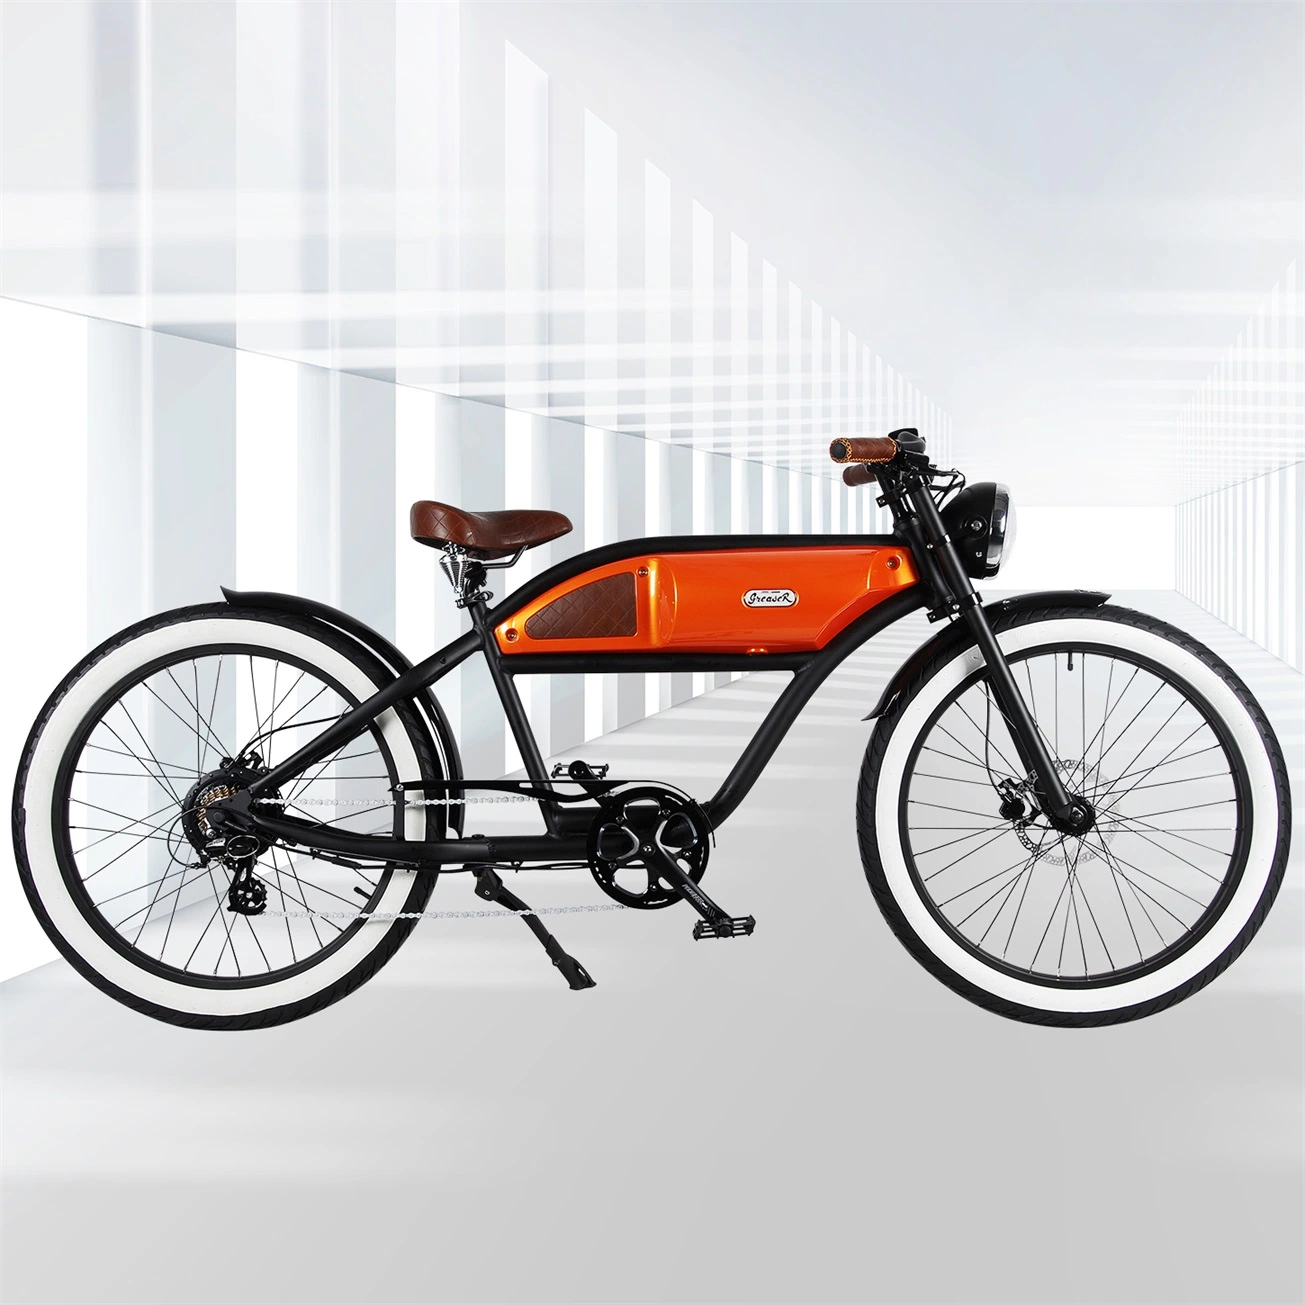 Best Sell Leisure 500W CE Urban Electric Bike Electric Scooter Electric Motorcycle CE Certificate Ebike for Adult